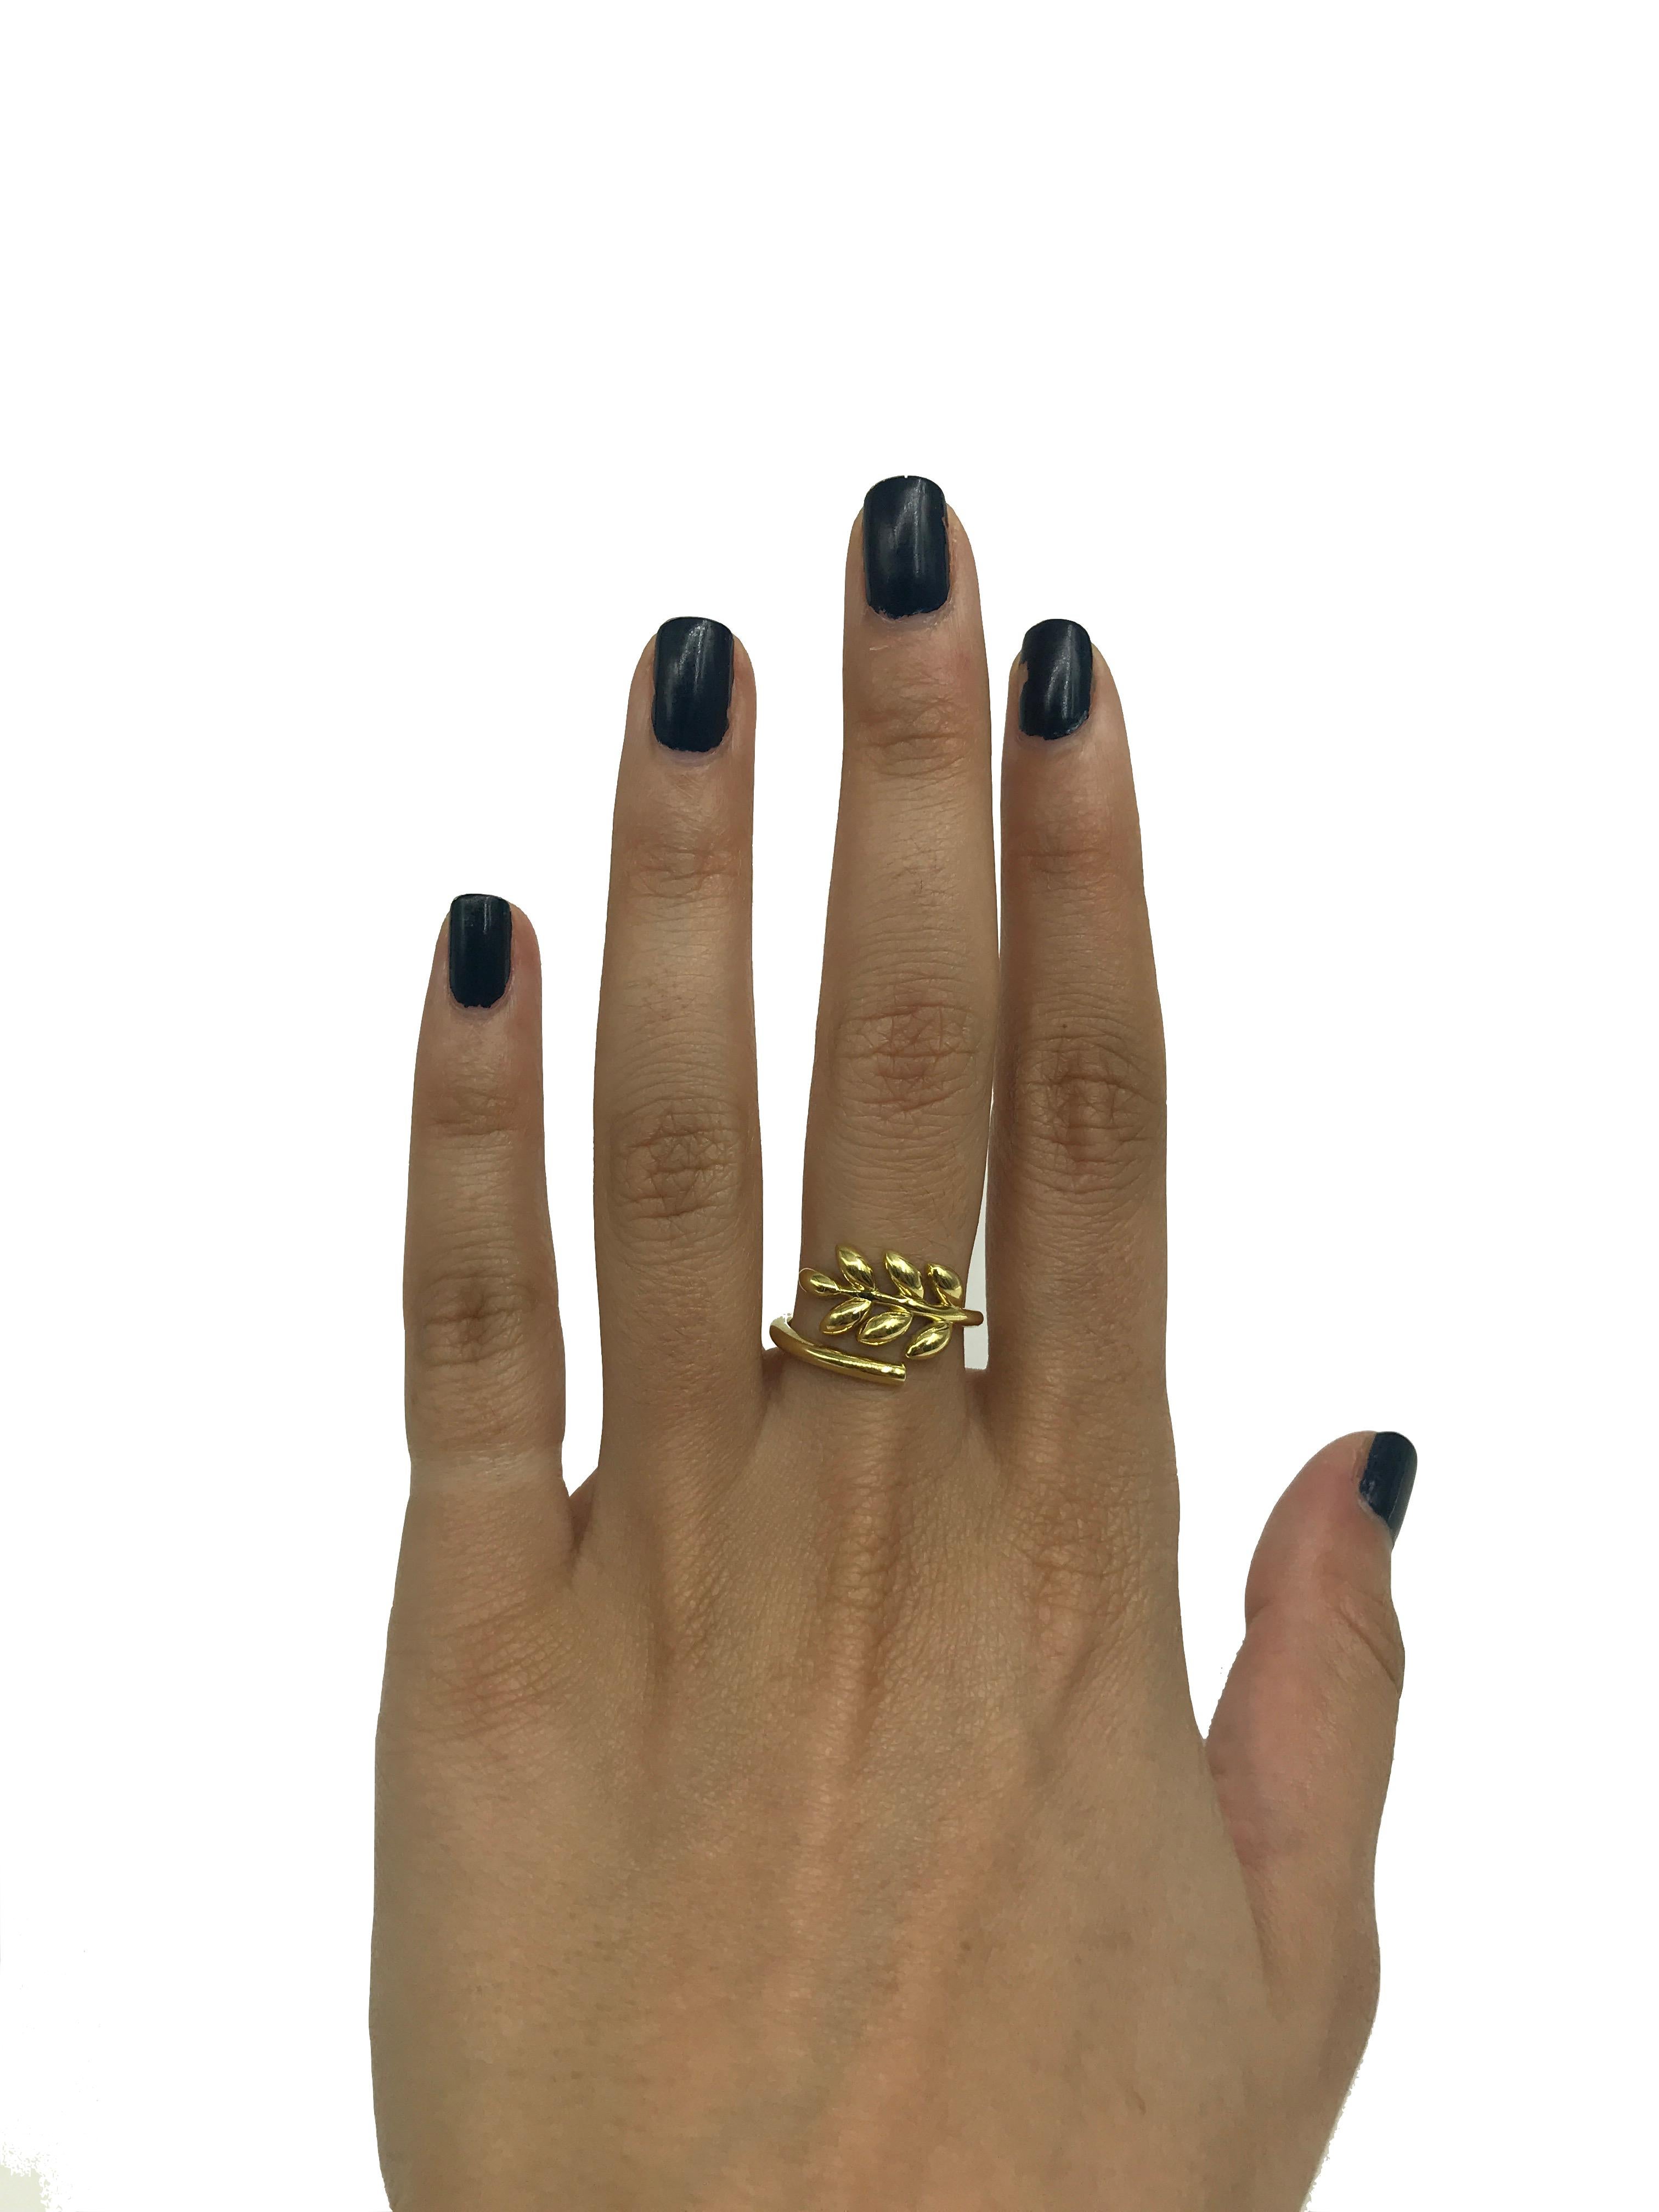 This 18k gold leaf ring is inspired by the organic way nature moves and grows. The fern shaped leaf ring wraps around your finger. The ring is a size 6. 